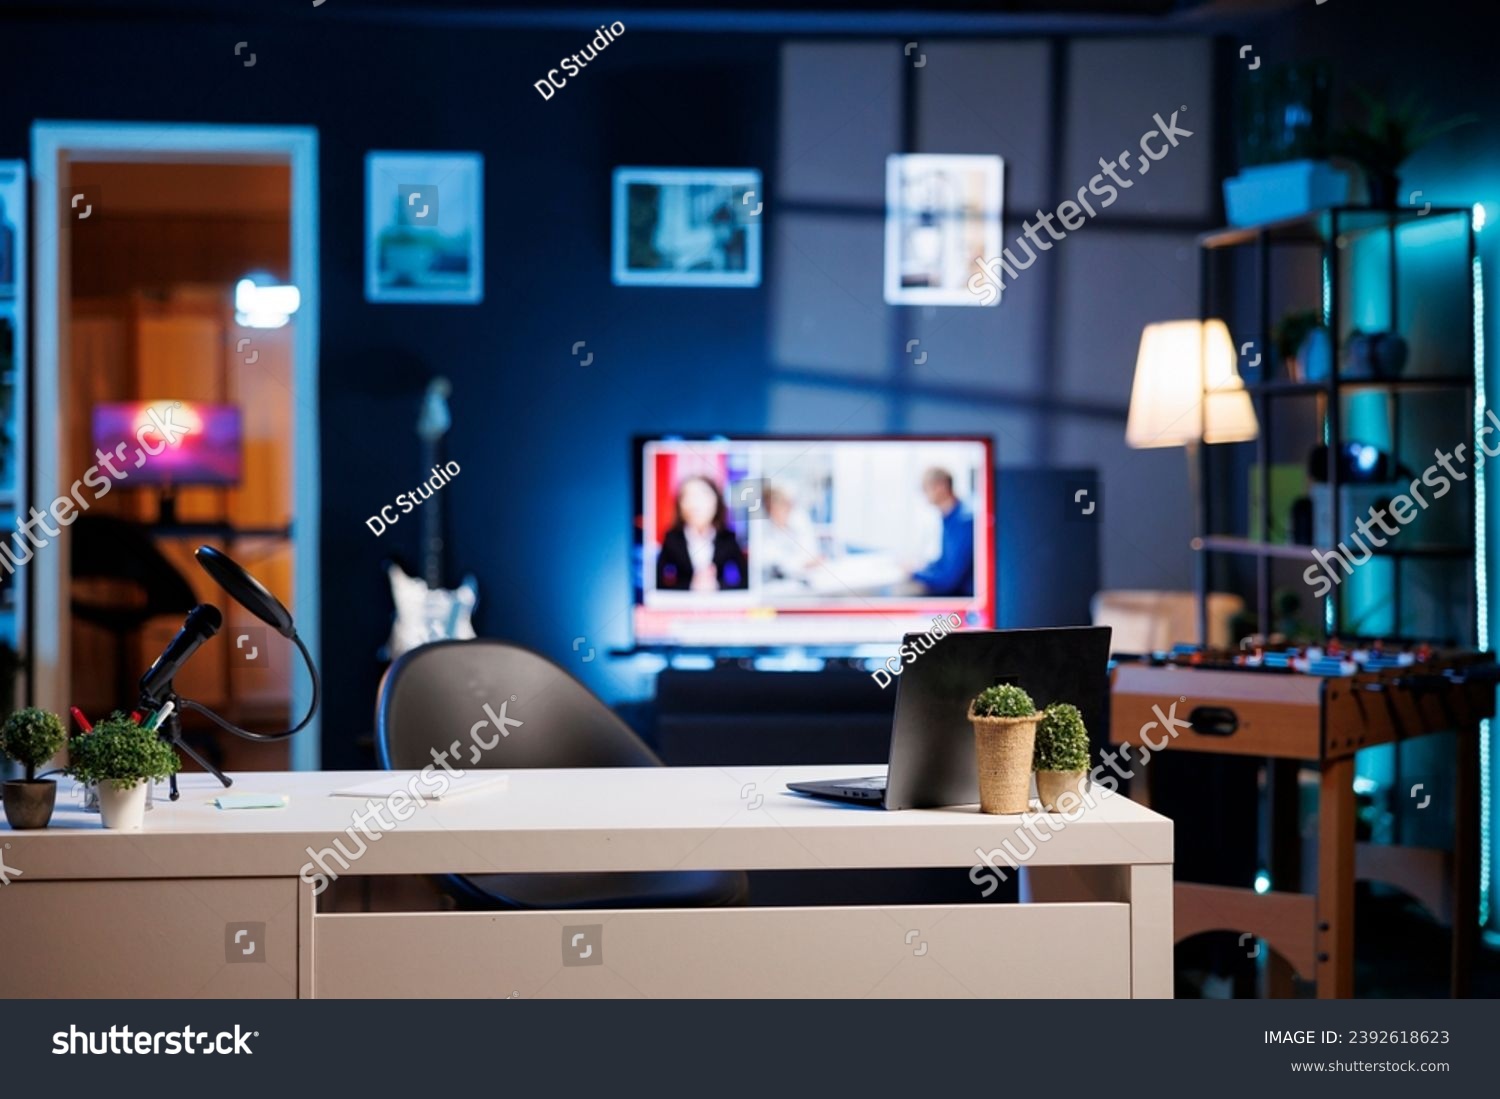 Empty home studio interior illuminated with neon lights at night, used for internet video production. Apartment filled with content creation equipment, TV running in blurry background #2392618623